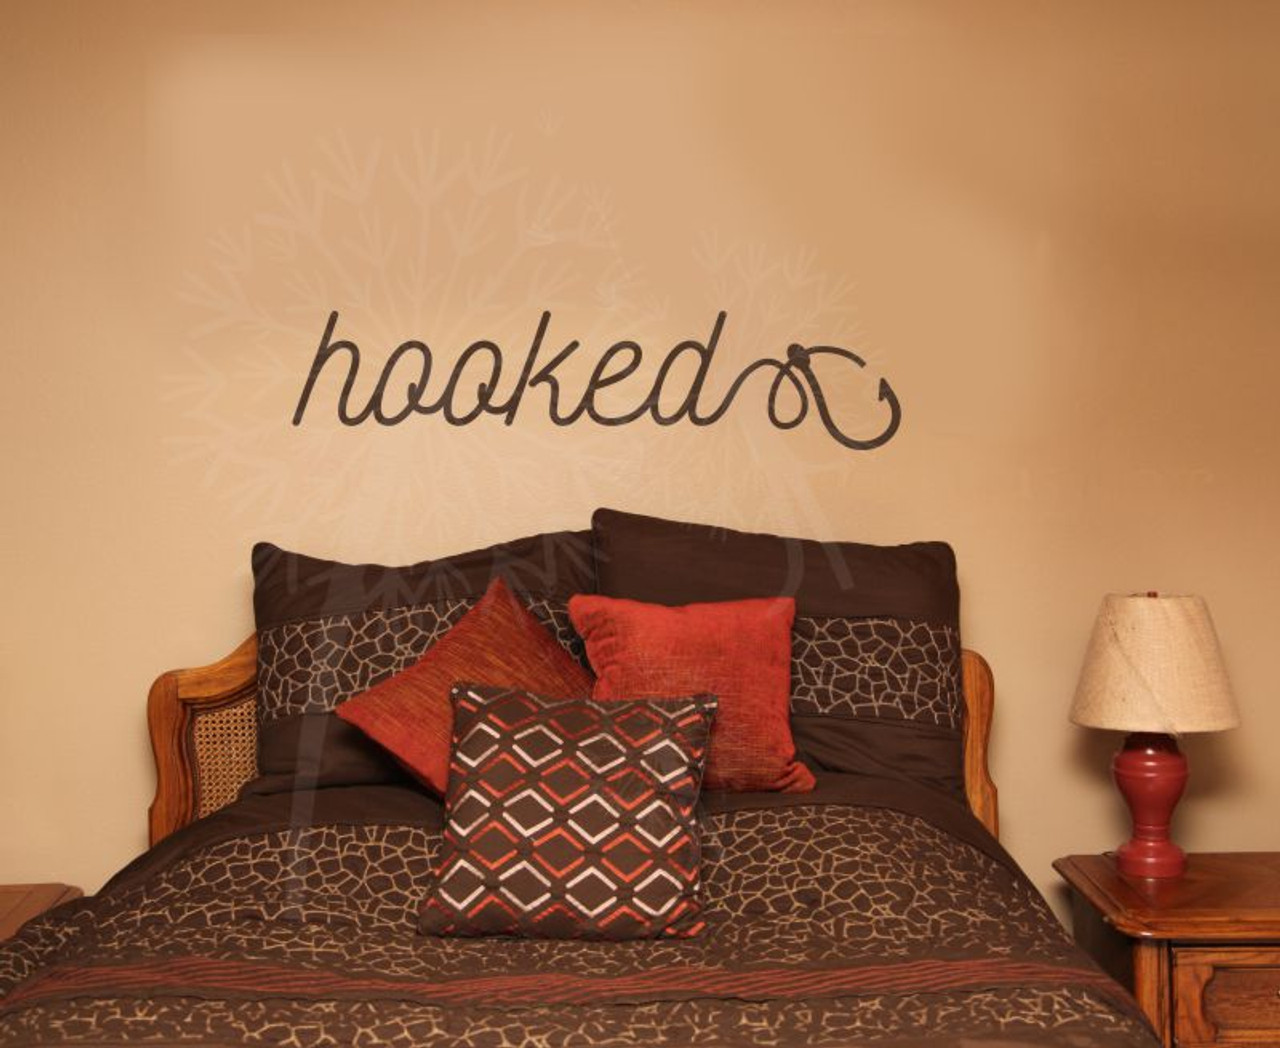 https://cdn11.bigcommerce.com/s-571px4/images/stencil/1280x1280/products/1775/6338/CLN056-A_Hooked_Fishing_Wall_Lettering_Love_Quotes_for_Fisherman_Couple_Choc_Brown__40600.1541717152.jpg?c=2